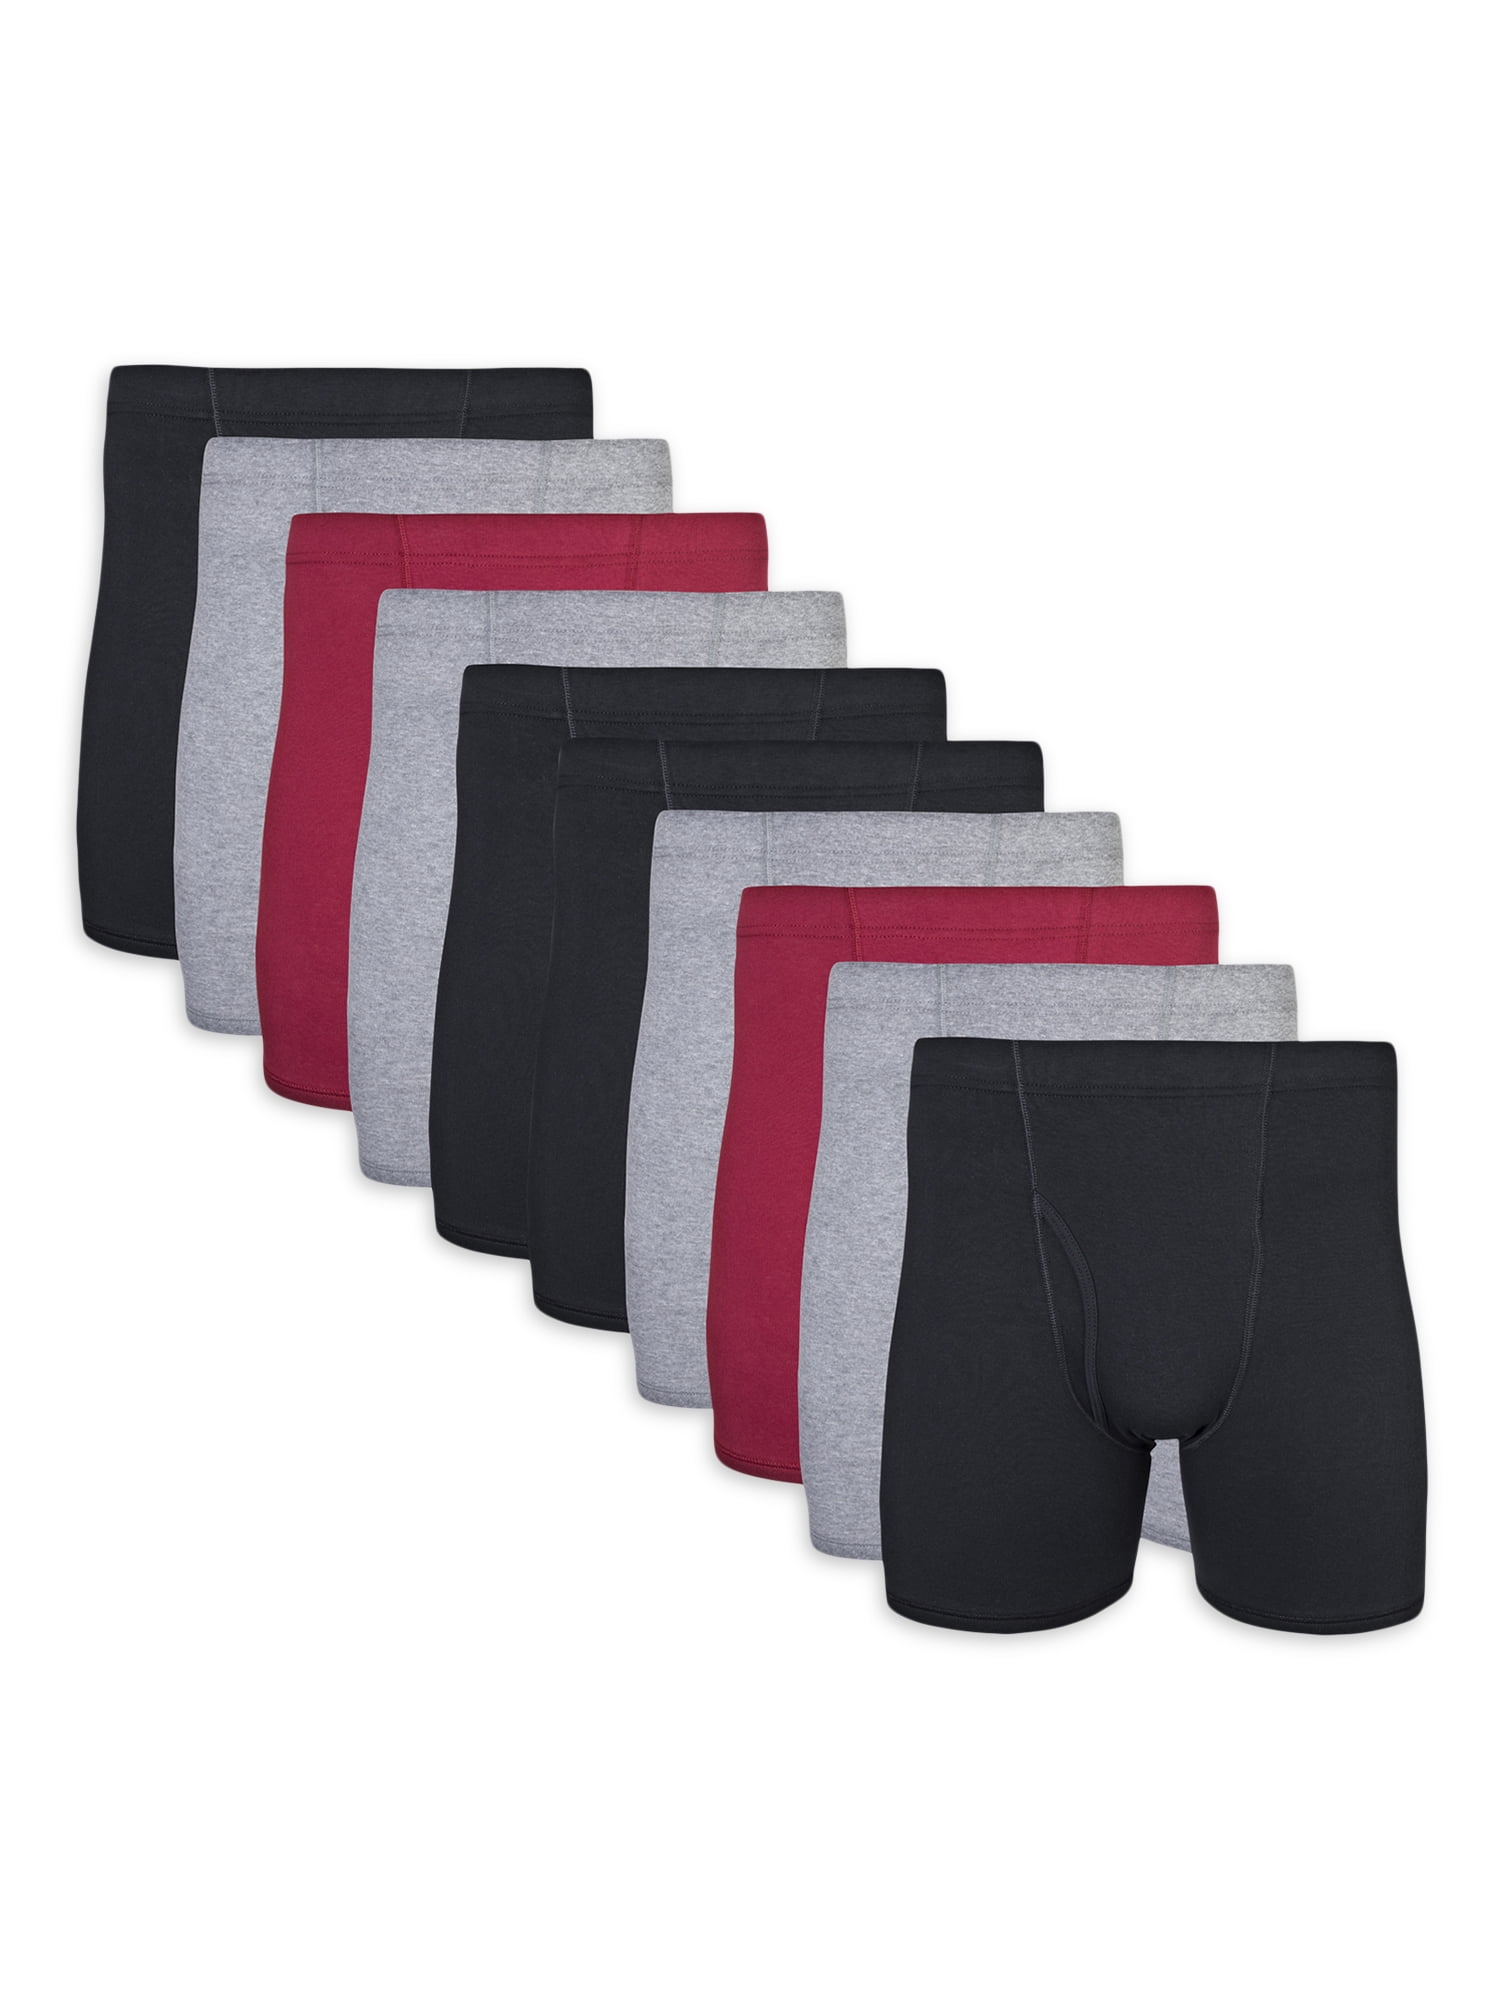 Gildan Adult Men's Boxer Briefs With Covered Waistband, 10-Pack, Sizes  S-2XL, 6 Inseam 